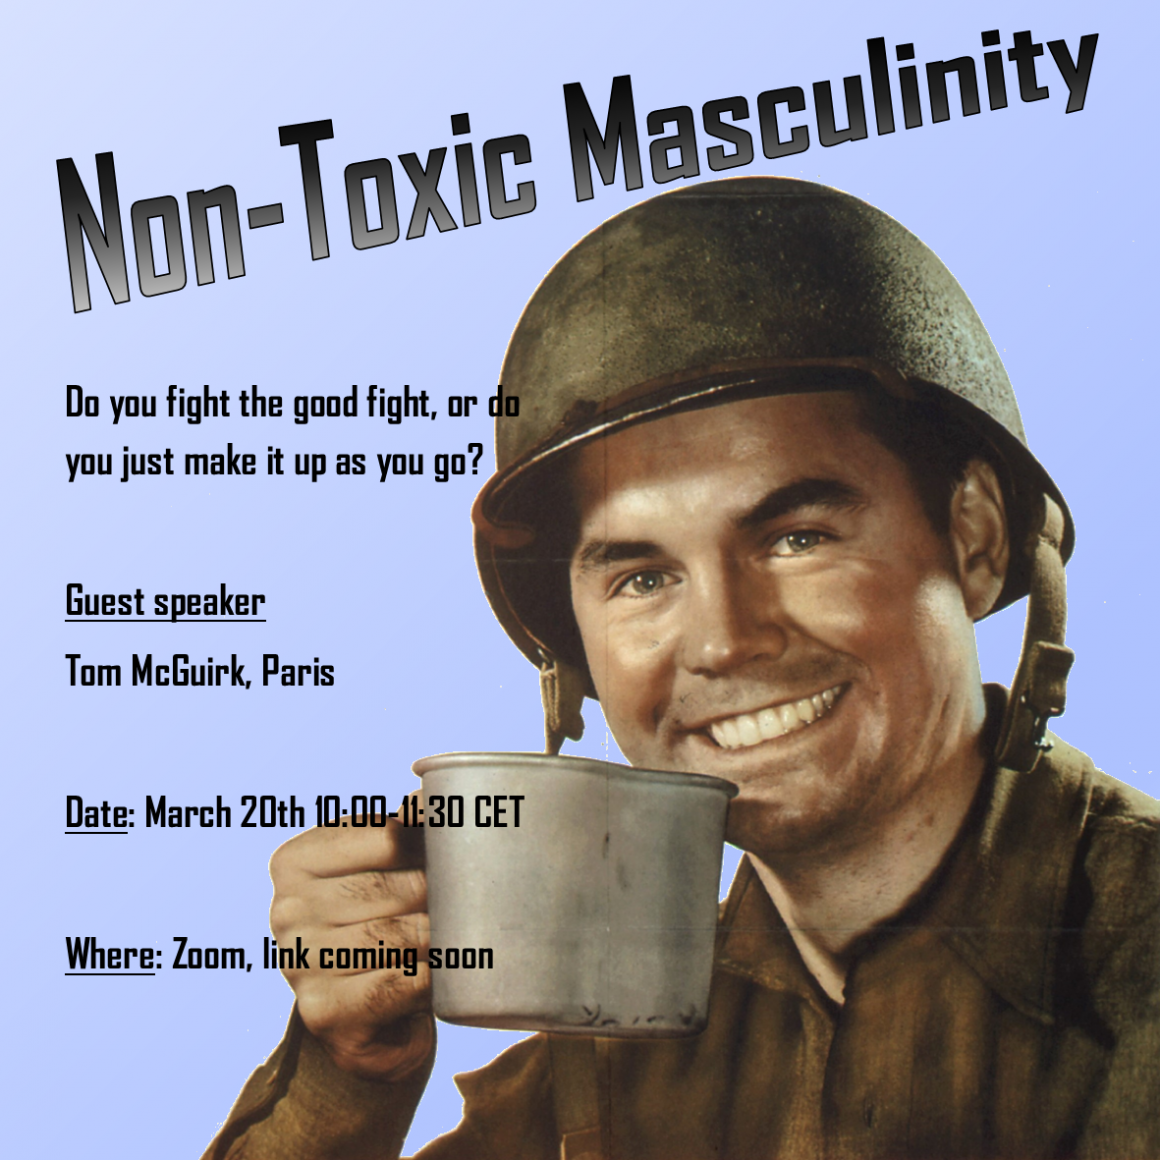 Non-Toxic Masculinity: Fighting the Good Fight